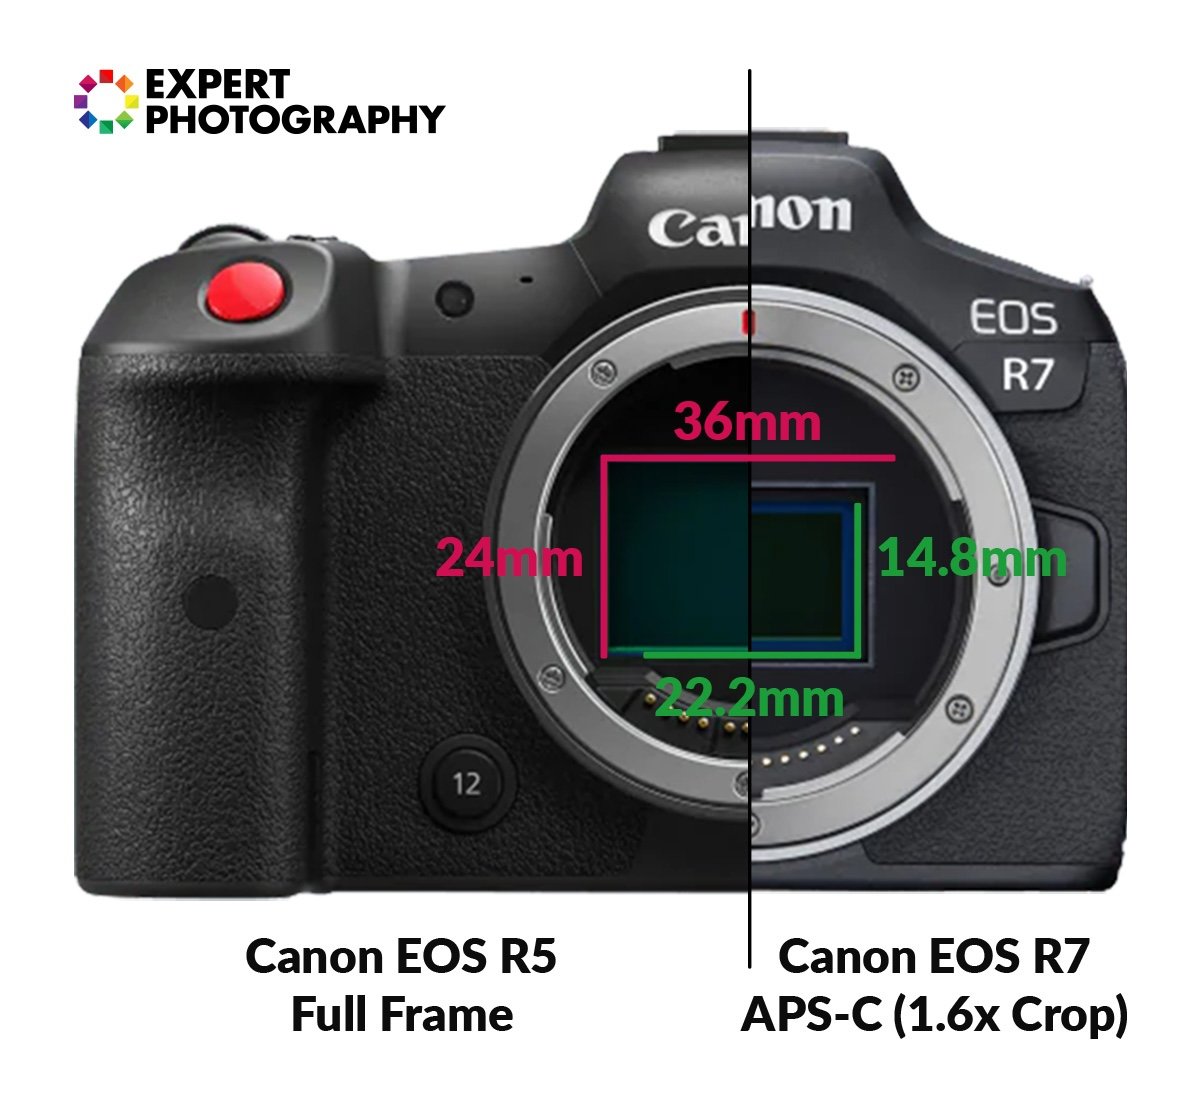 A comparison of sensor sizes on full-frame and APS-C Canon cameras